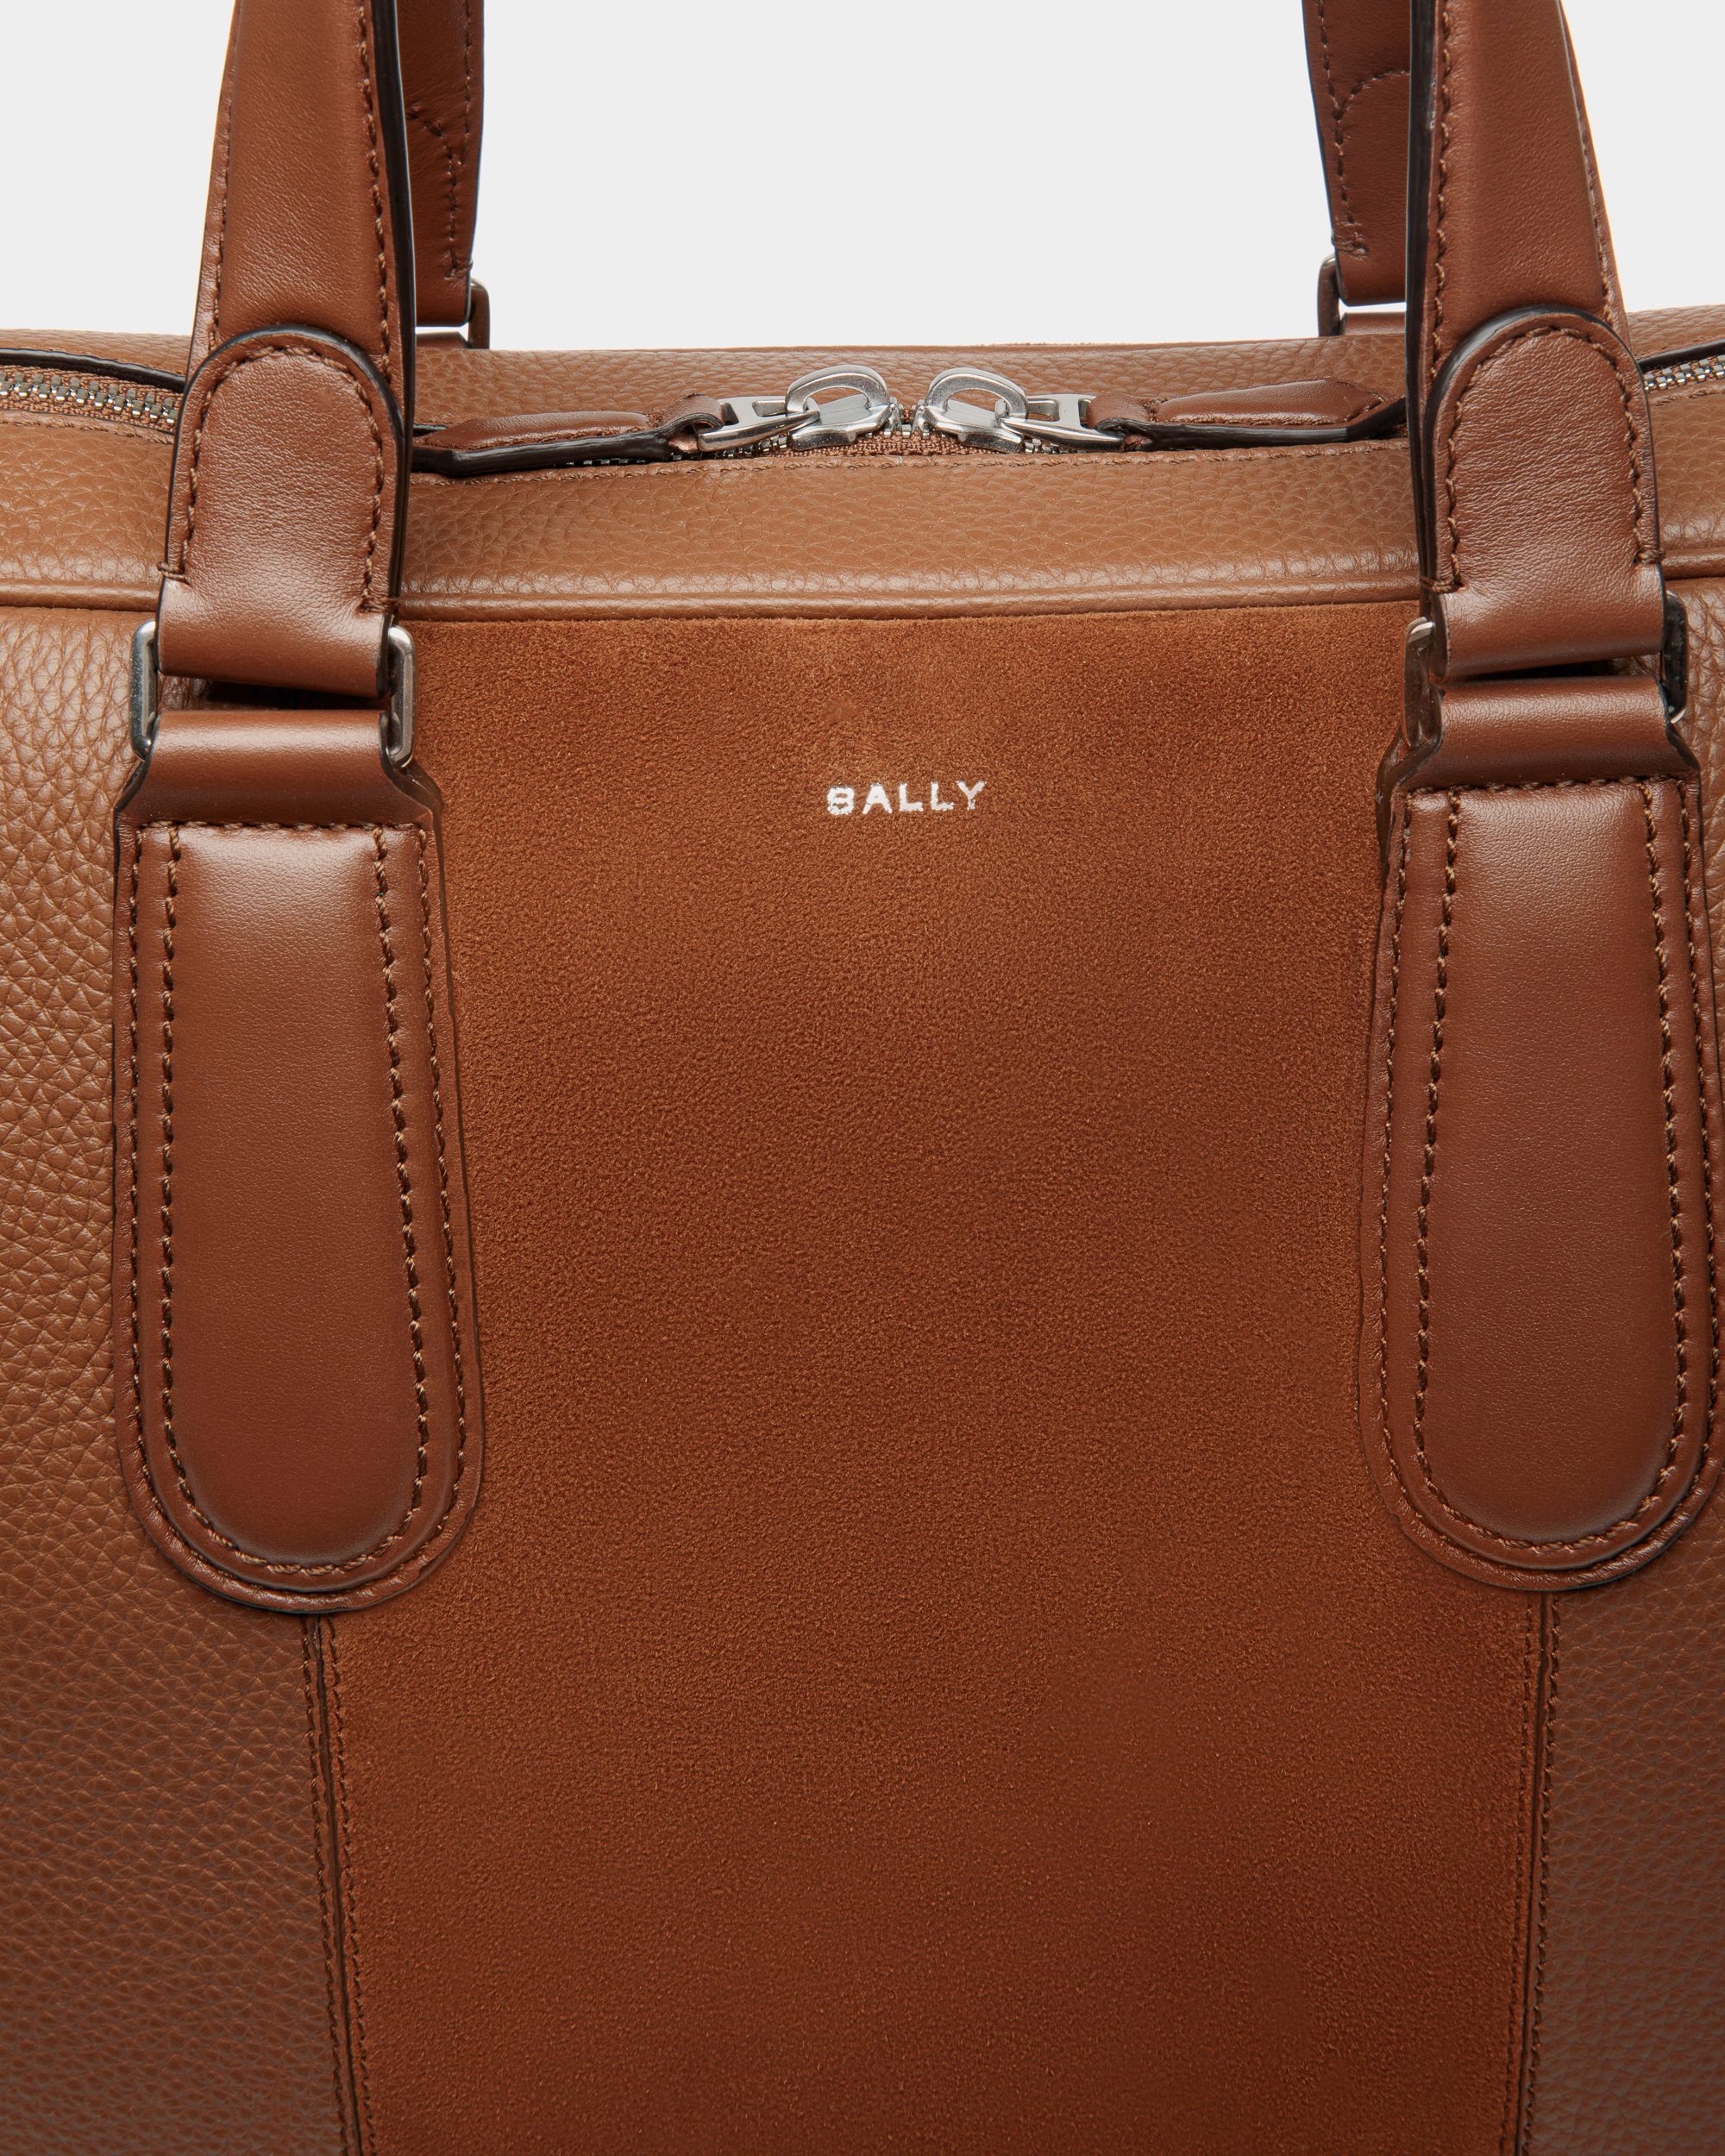 Spin | Men's Briefcase in Brown Leather | Bally | Still Life Detail